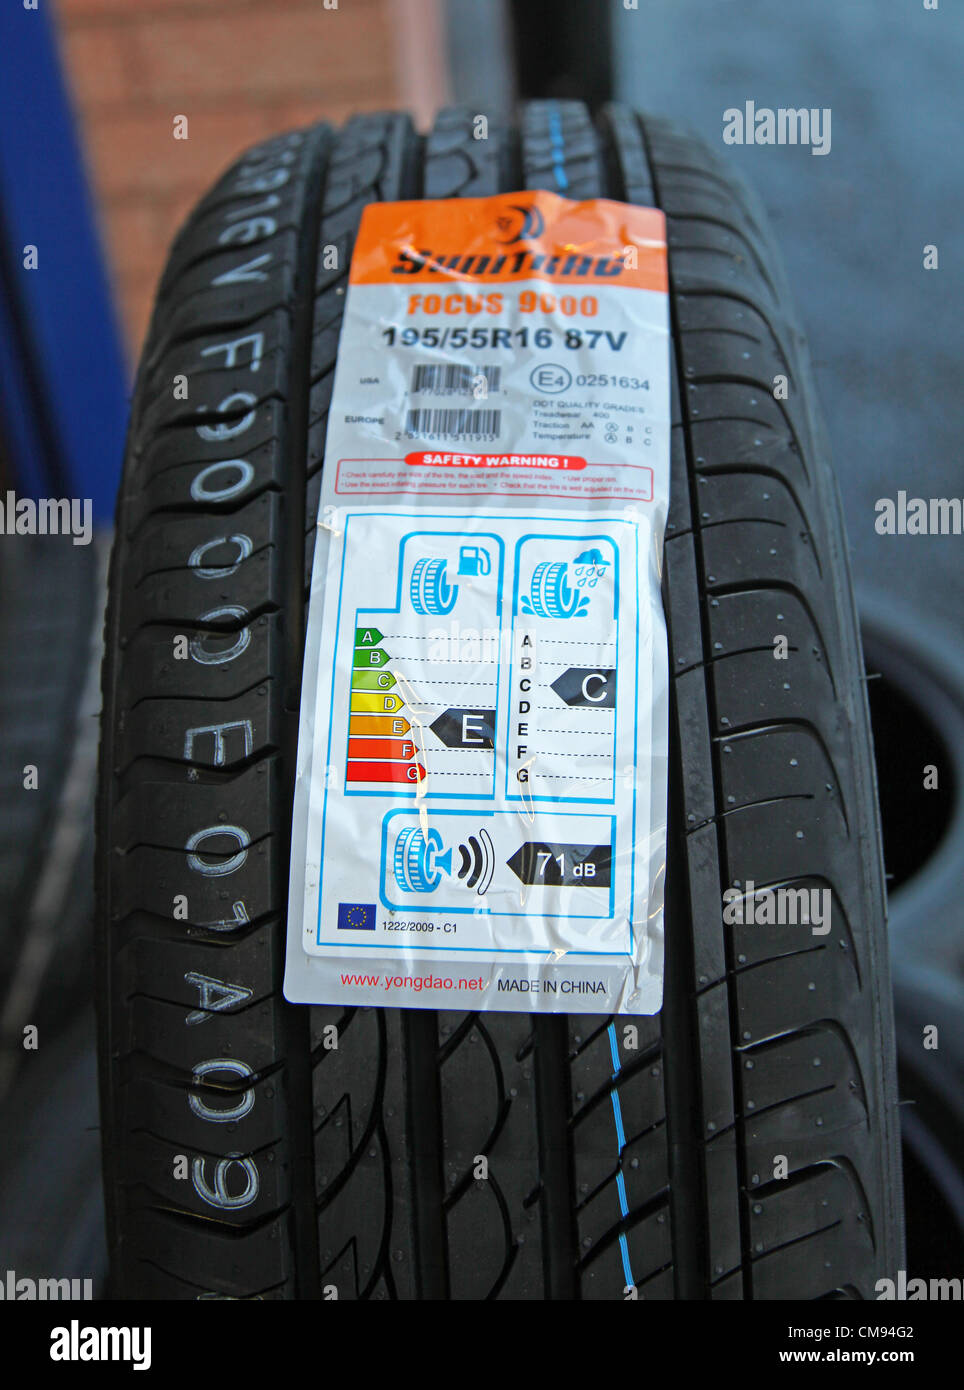 On 1 November 2012, new European tyre labelling regulations came into force that could make driving safer, more economical, less polluting and less noisy. Stock Photo